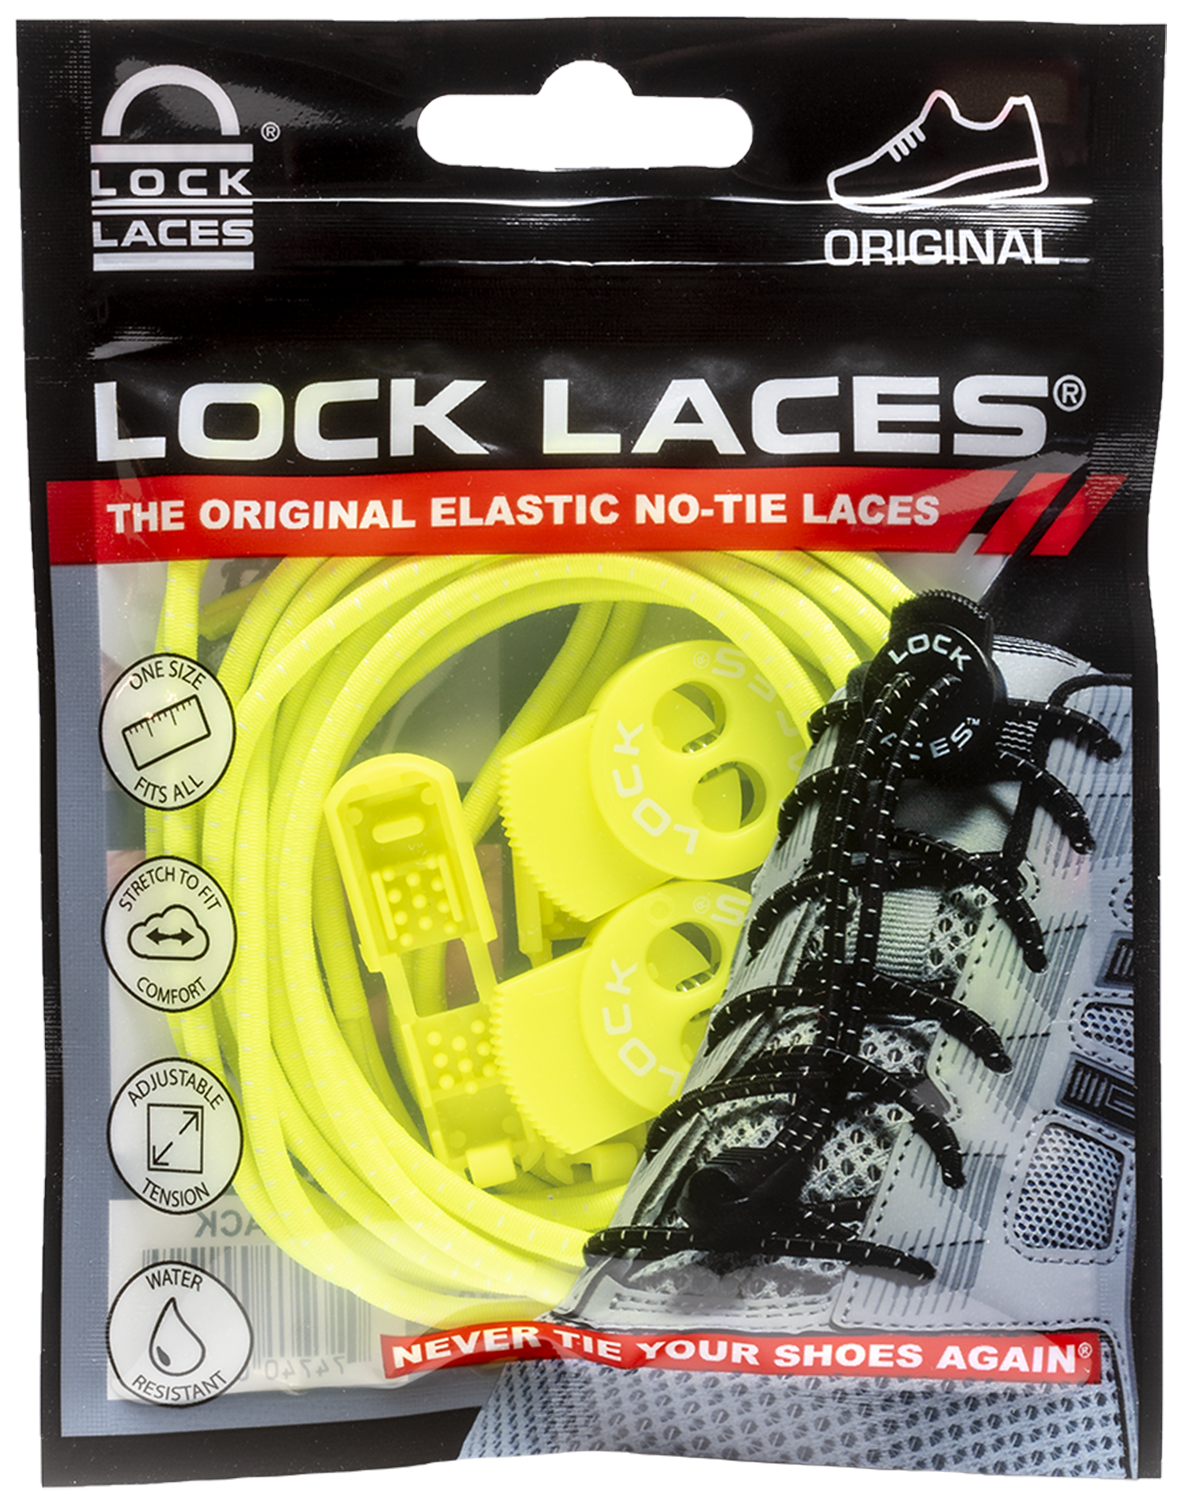 How to Use Lock Laces® the Original Elastic No Tie Laces